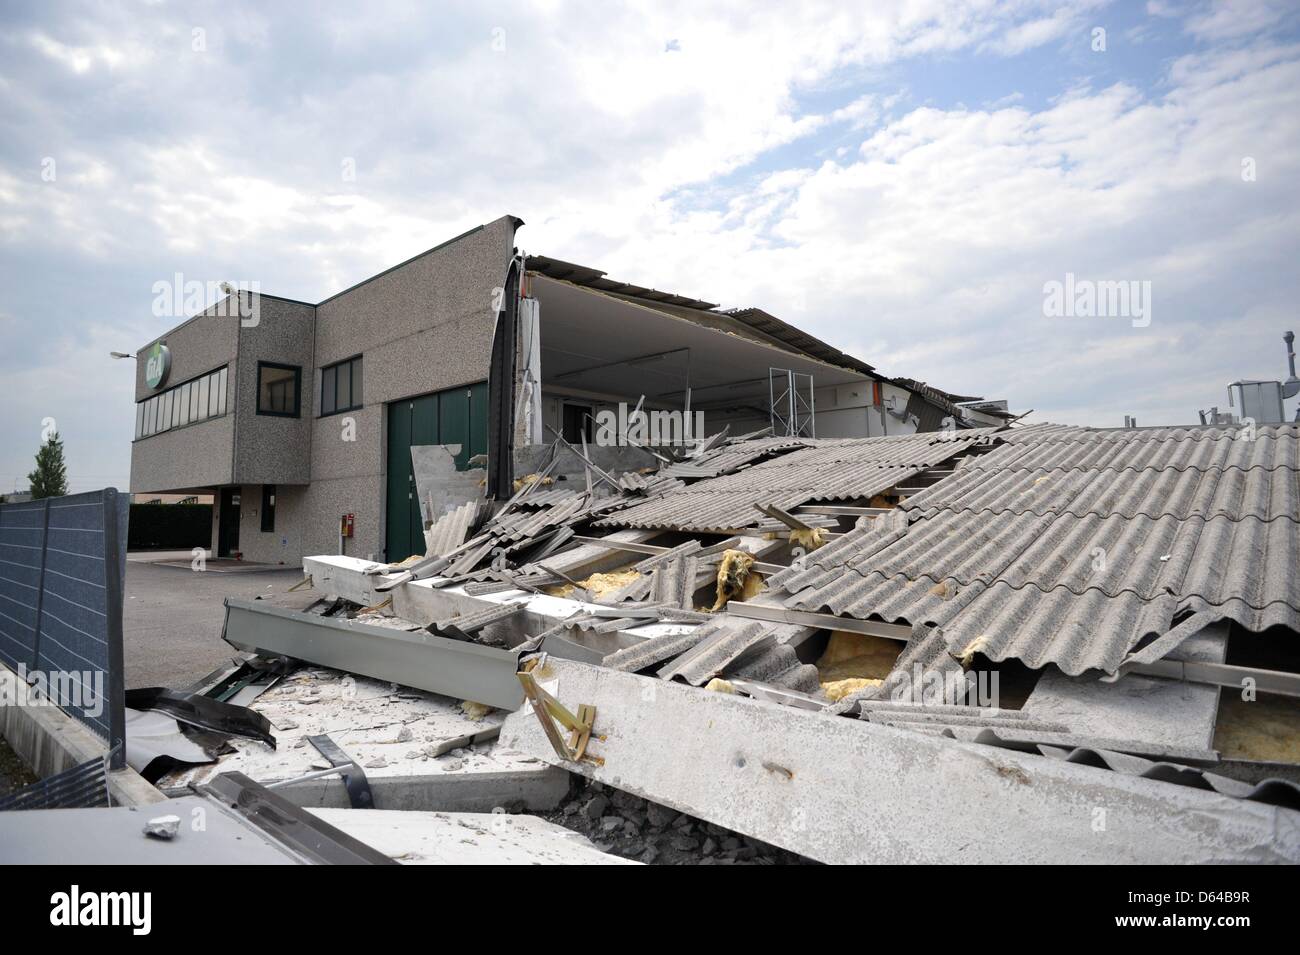 The ruins of a collapsed hall are pictured in Mirabello, Italy, 23 May 2012. An earthquake measuring 6.0 on the Richter scale shook the Italian region Emilia-Romagna early in the morning on 20 May 2012. Photo: Nicolas Armer Stock Photo